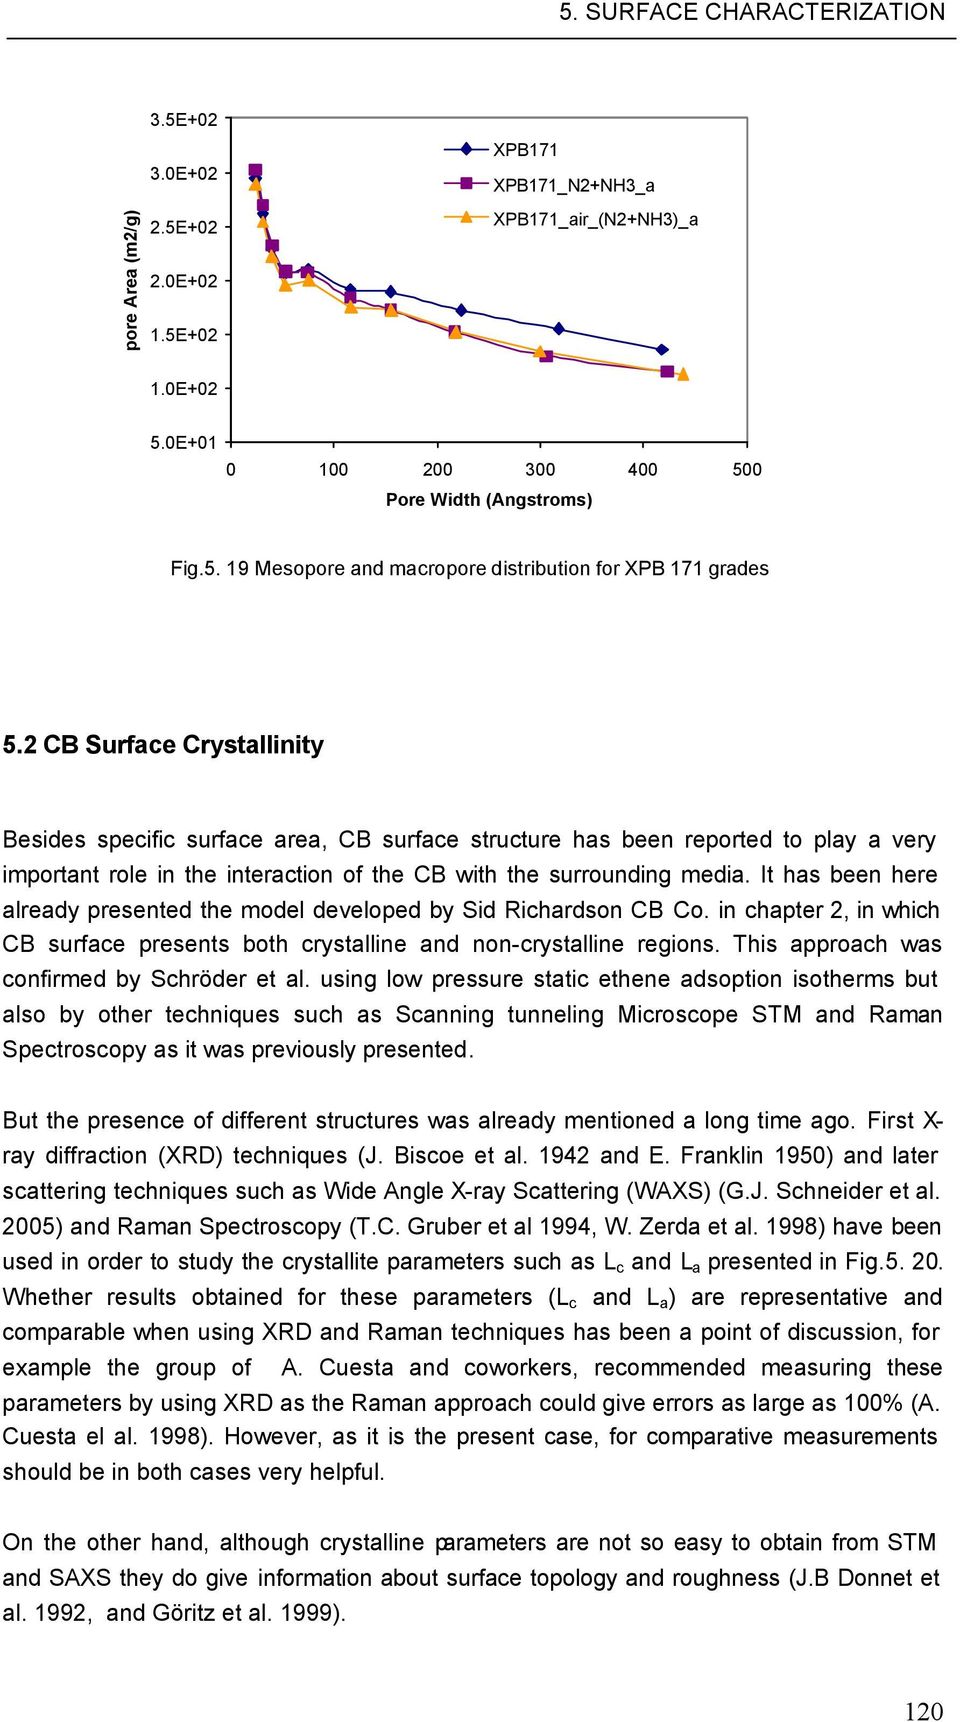 It has been here already presented the model developed by Sid Richardson CB Co. in chapter 2, in which CB surface presents both crystalline and non-crystalline regions.